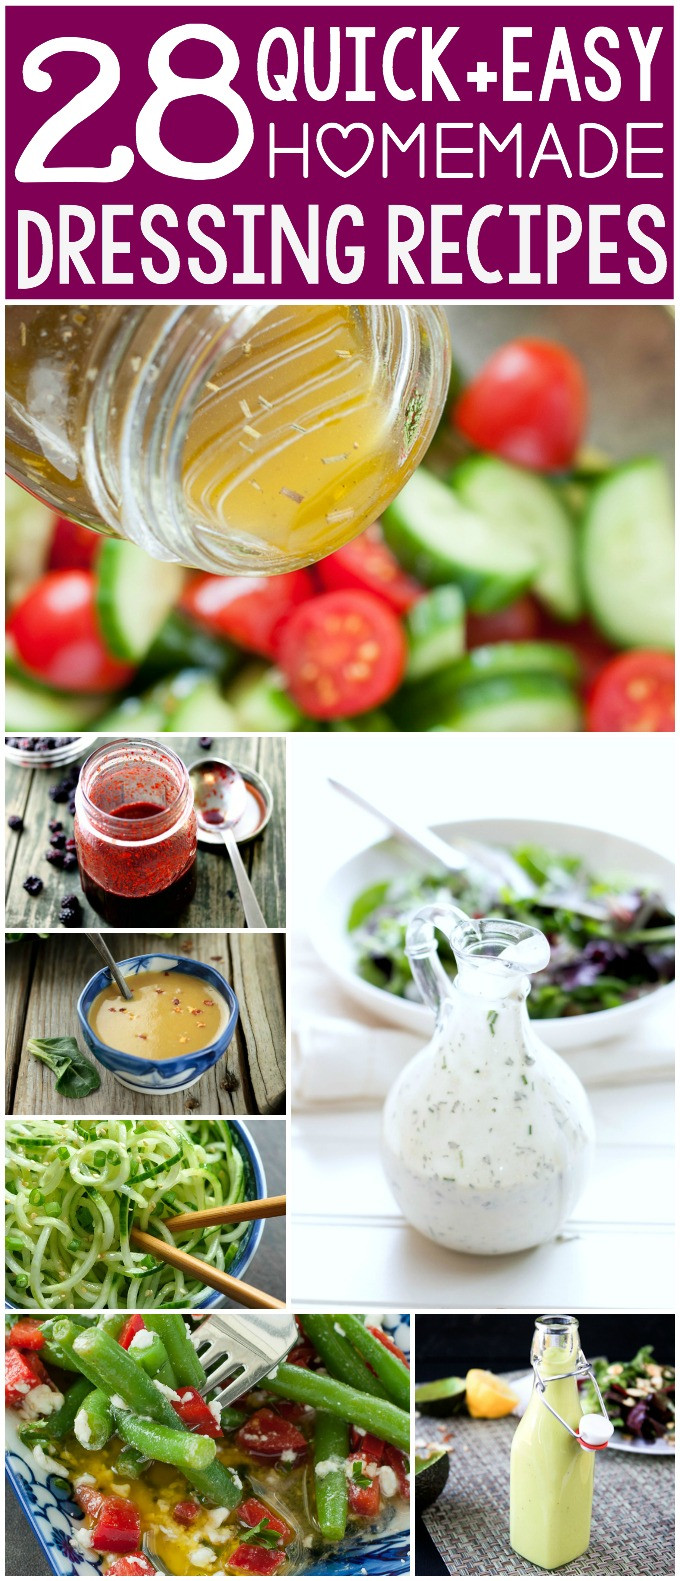 Simple Salad Dressings Recipes
 28 Quick and Easy Homemade Salad Dressing Recipes